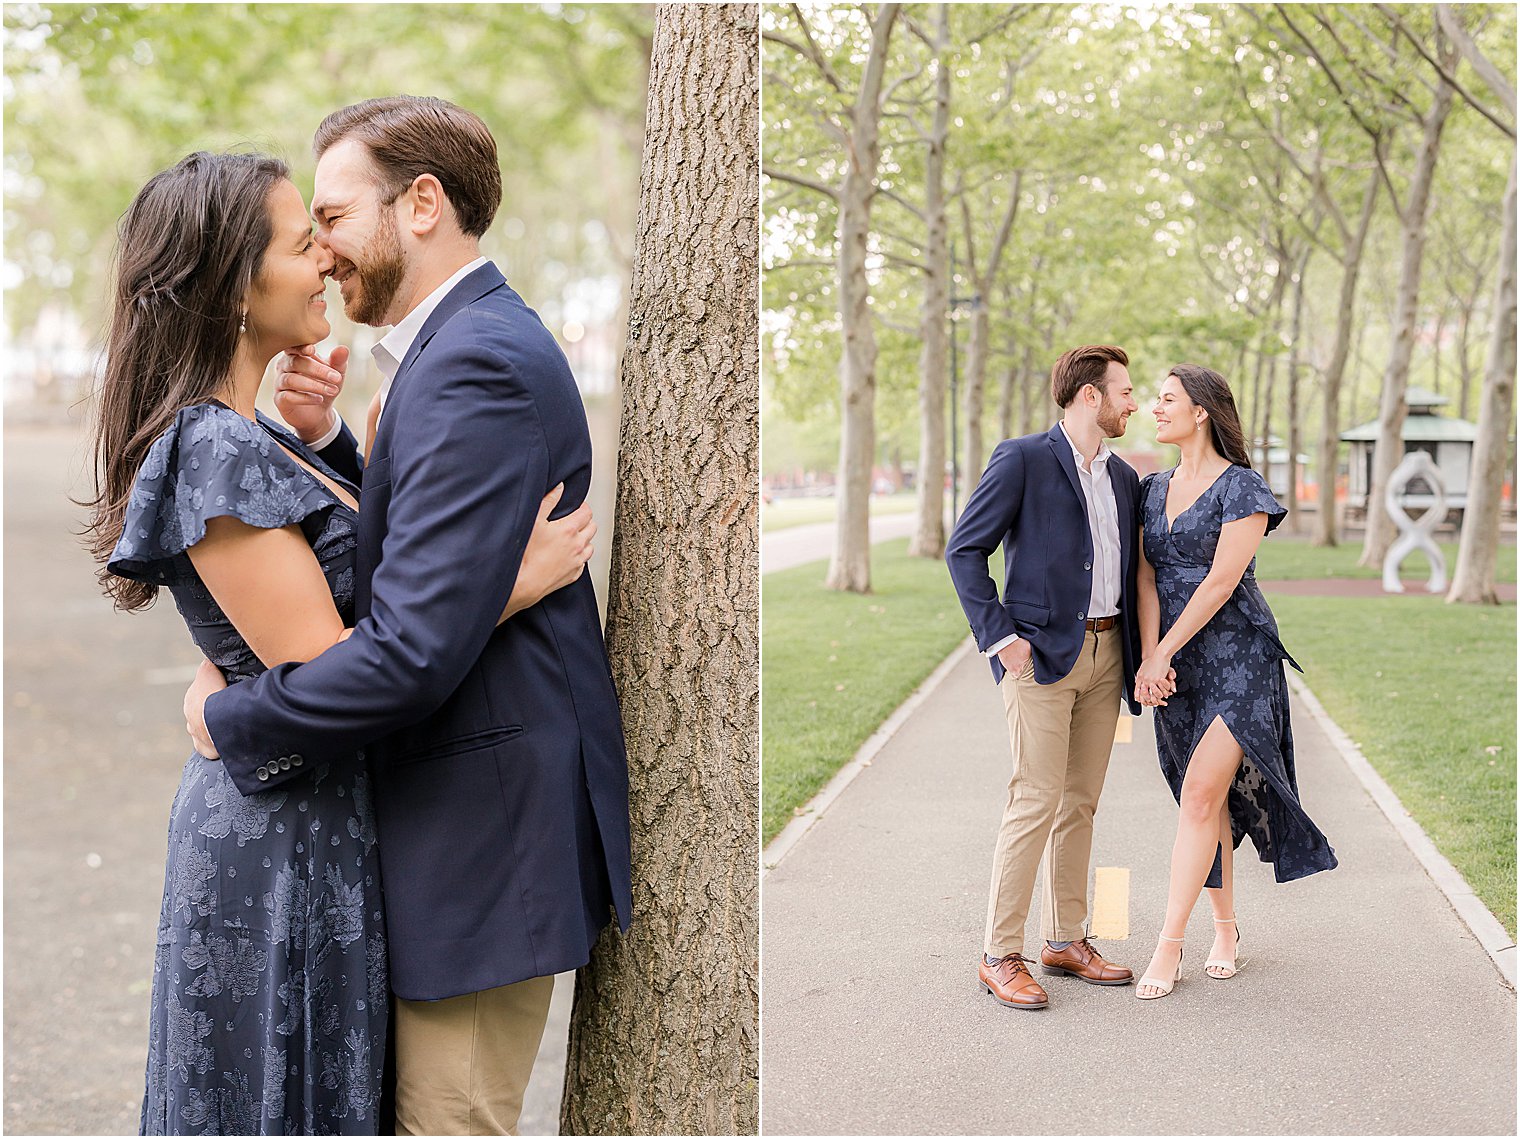 man and woman kiss leaning against tree in New Jersey park